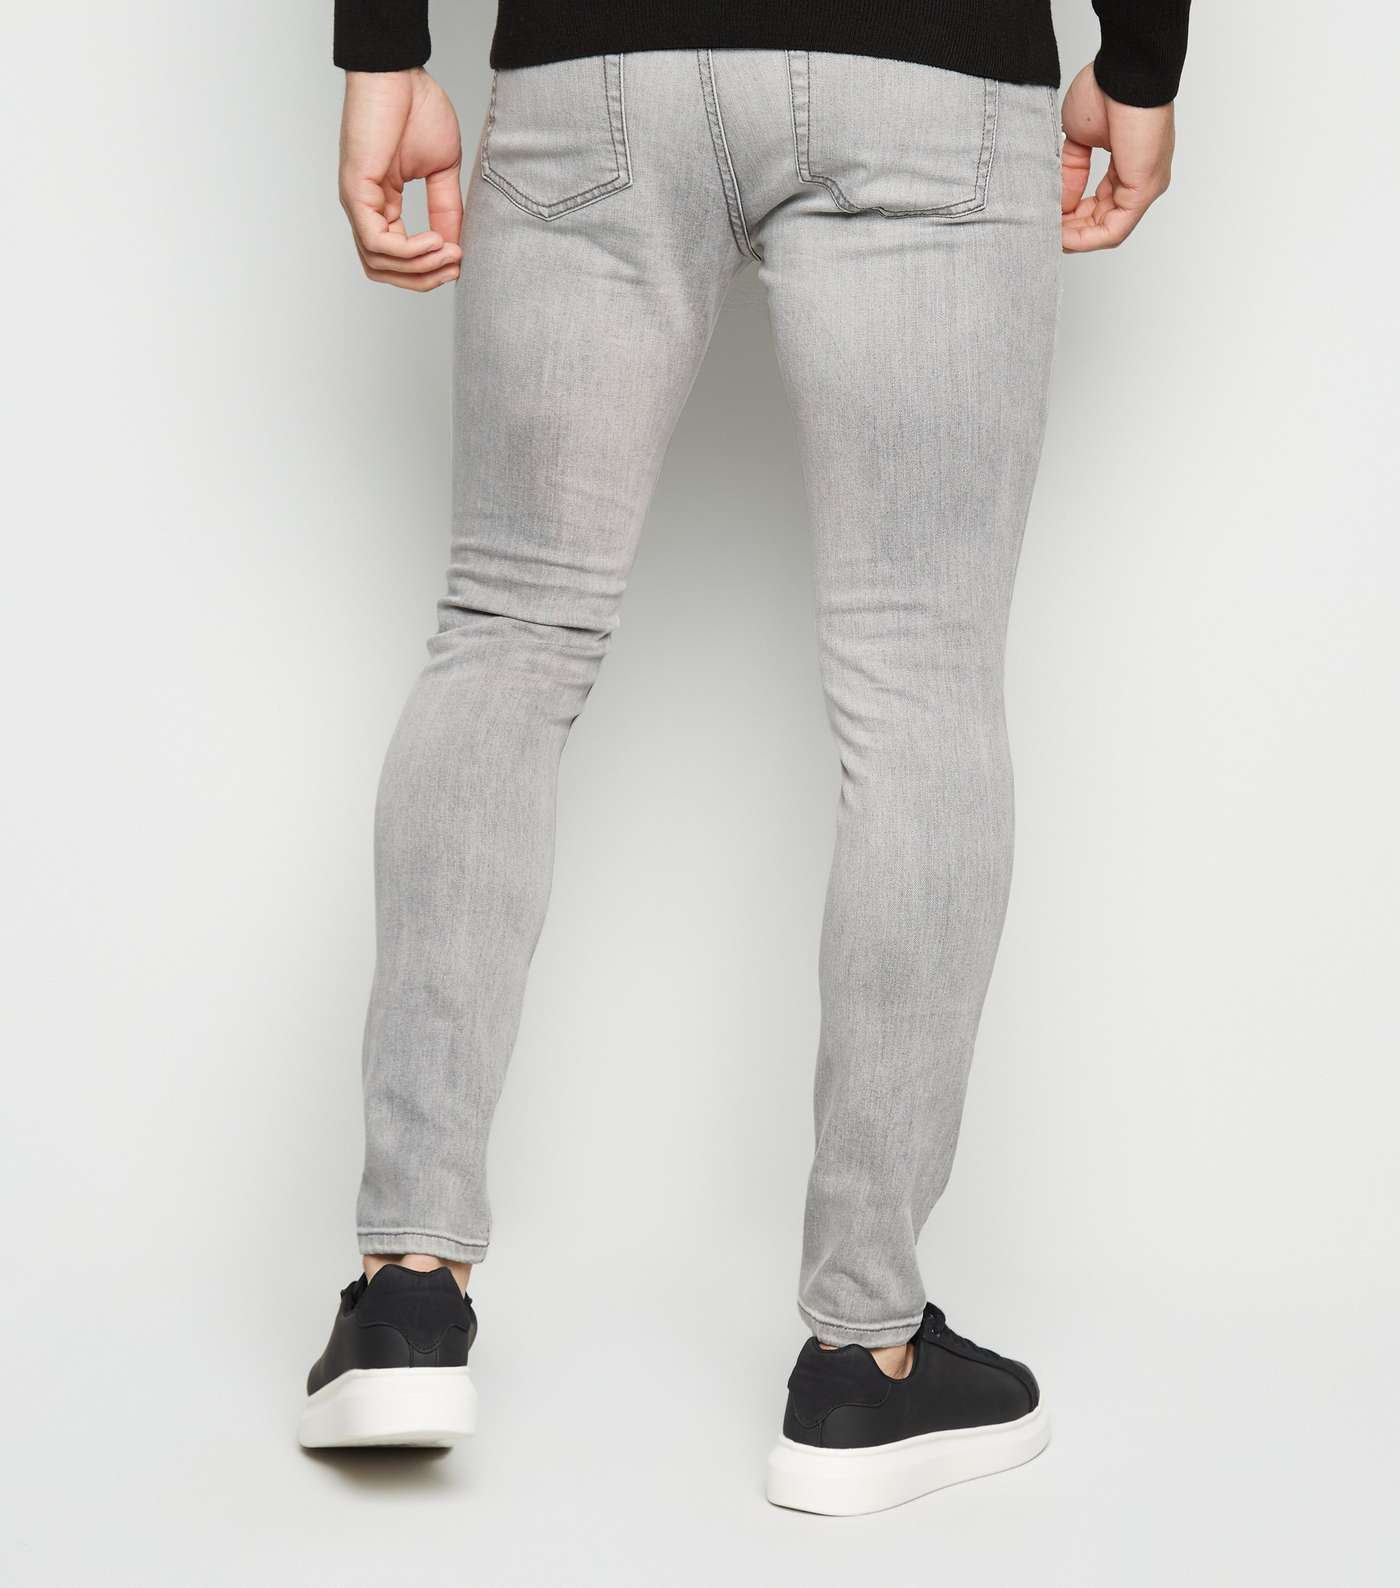 Pale Grey Ripped Spray On Skinny Jeans Image 3